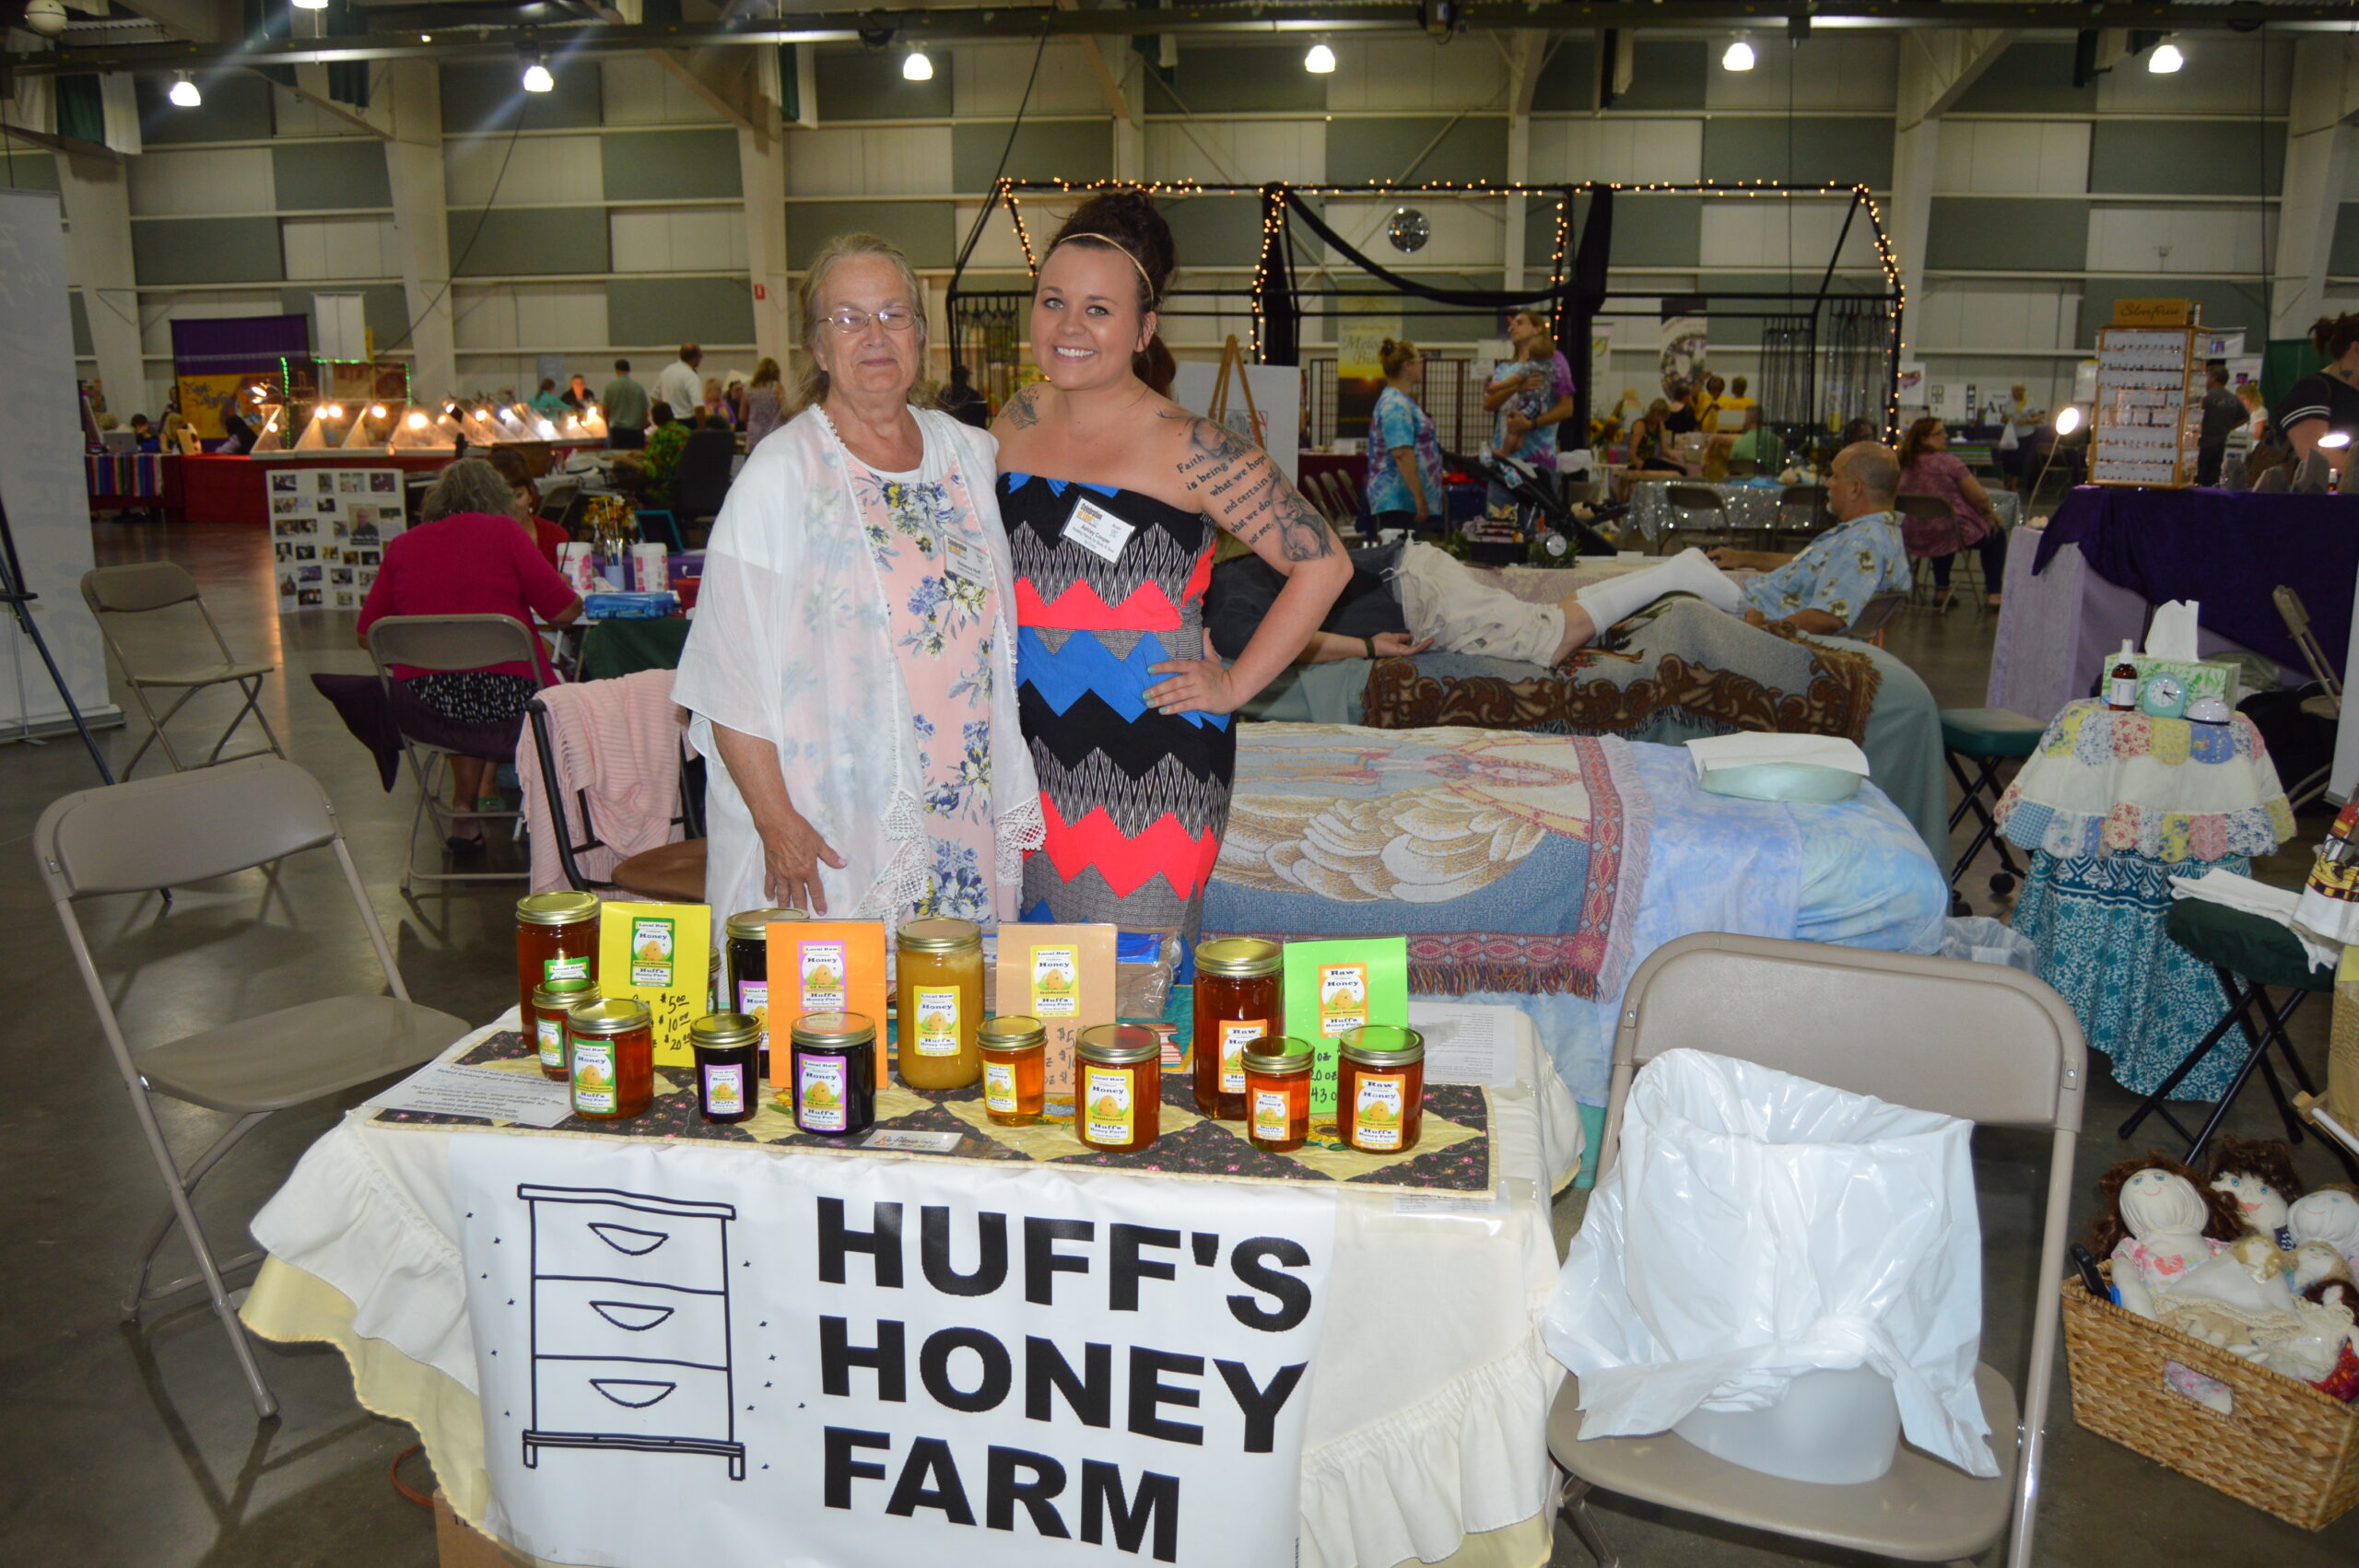 New Visions Holistic Expo Huffs Honey Farm Booth image